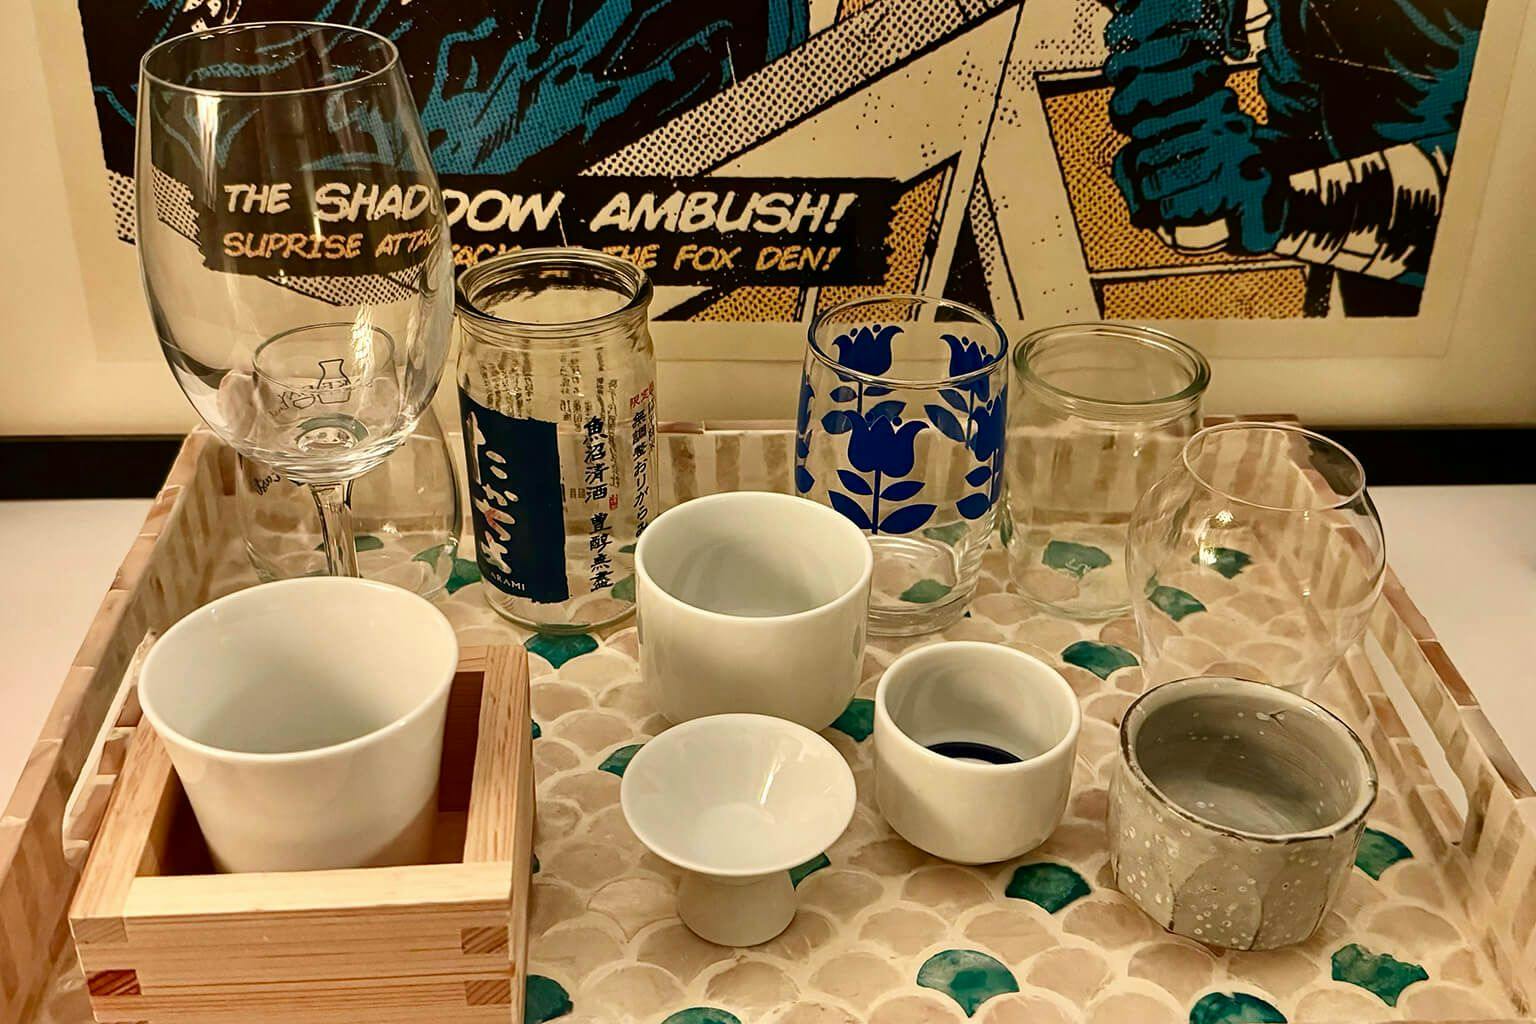 There are so many types of sake vessels, from small ochoko to your regular wine glass